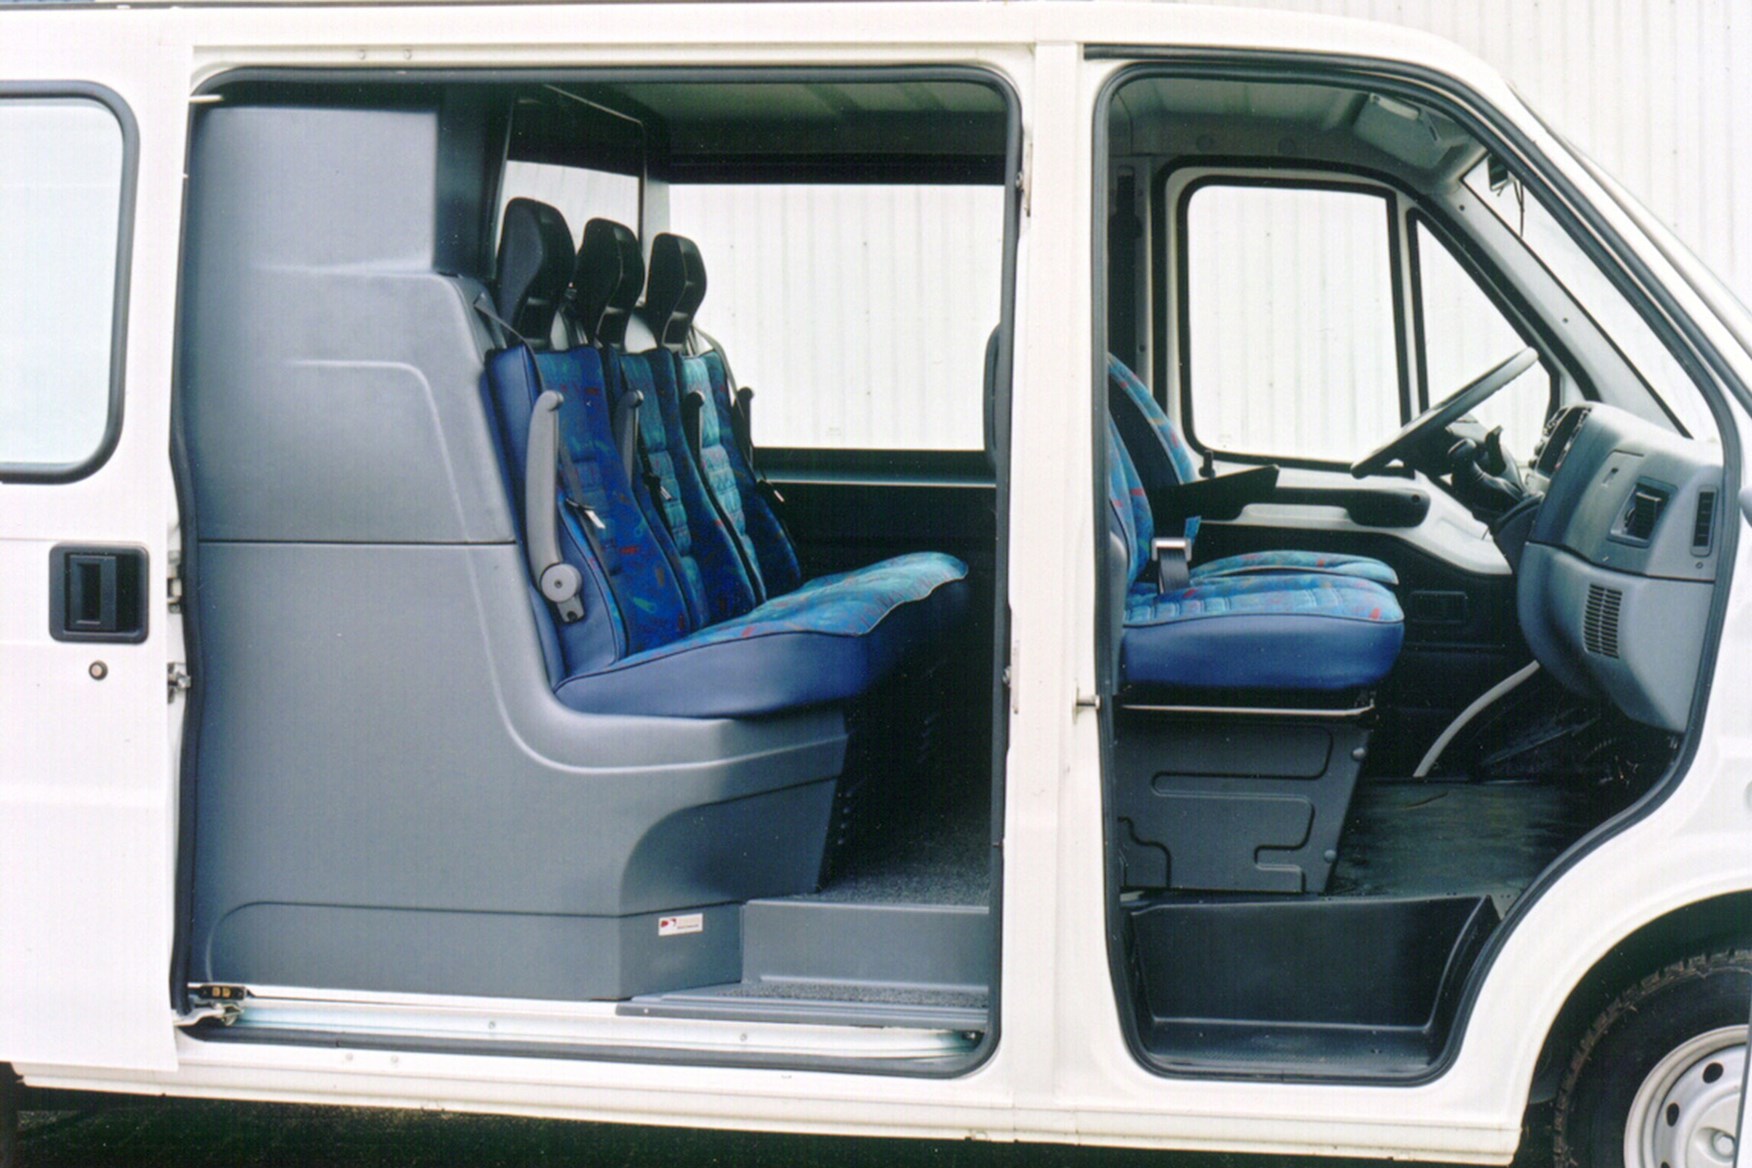 Citroen Relay review on Parkers Vans - cabin, interior